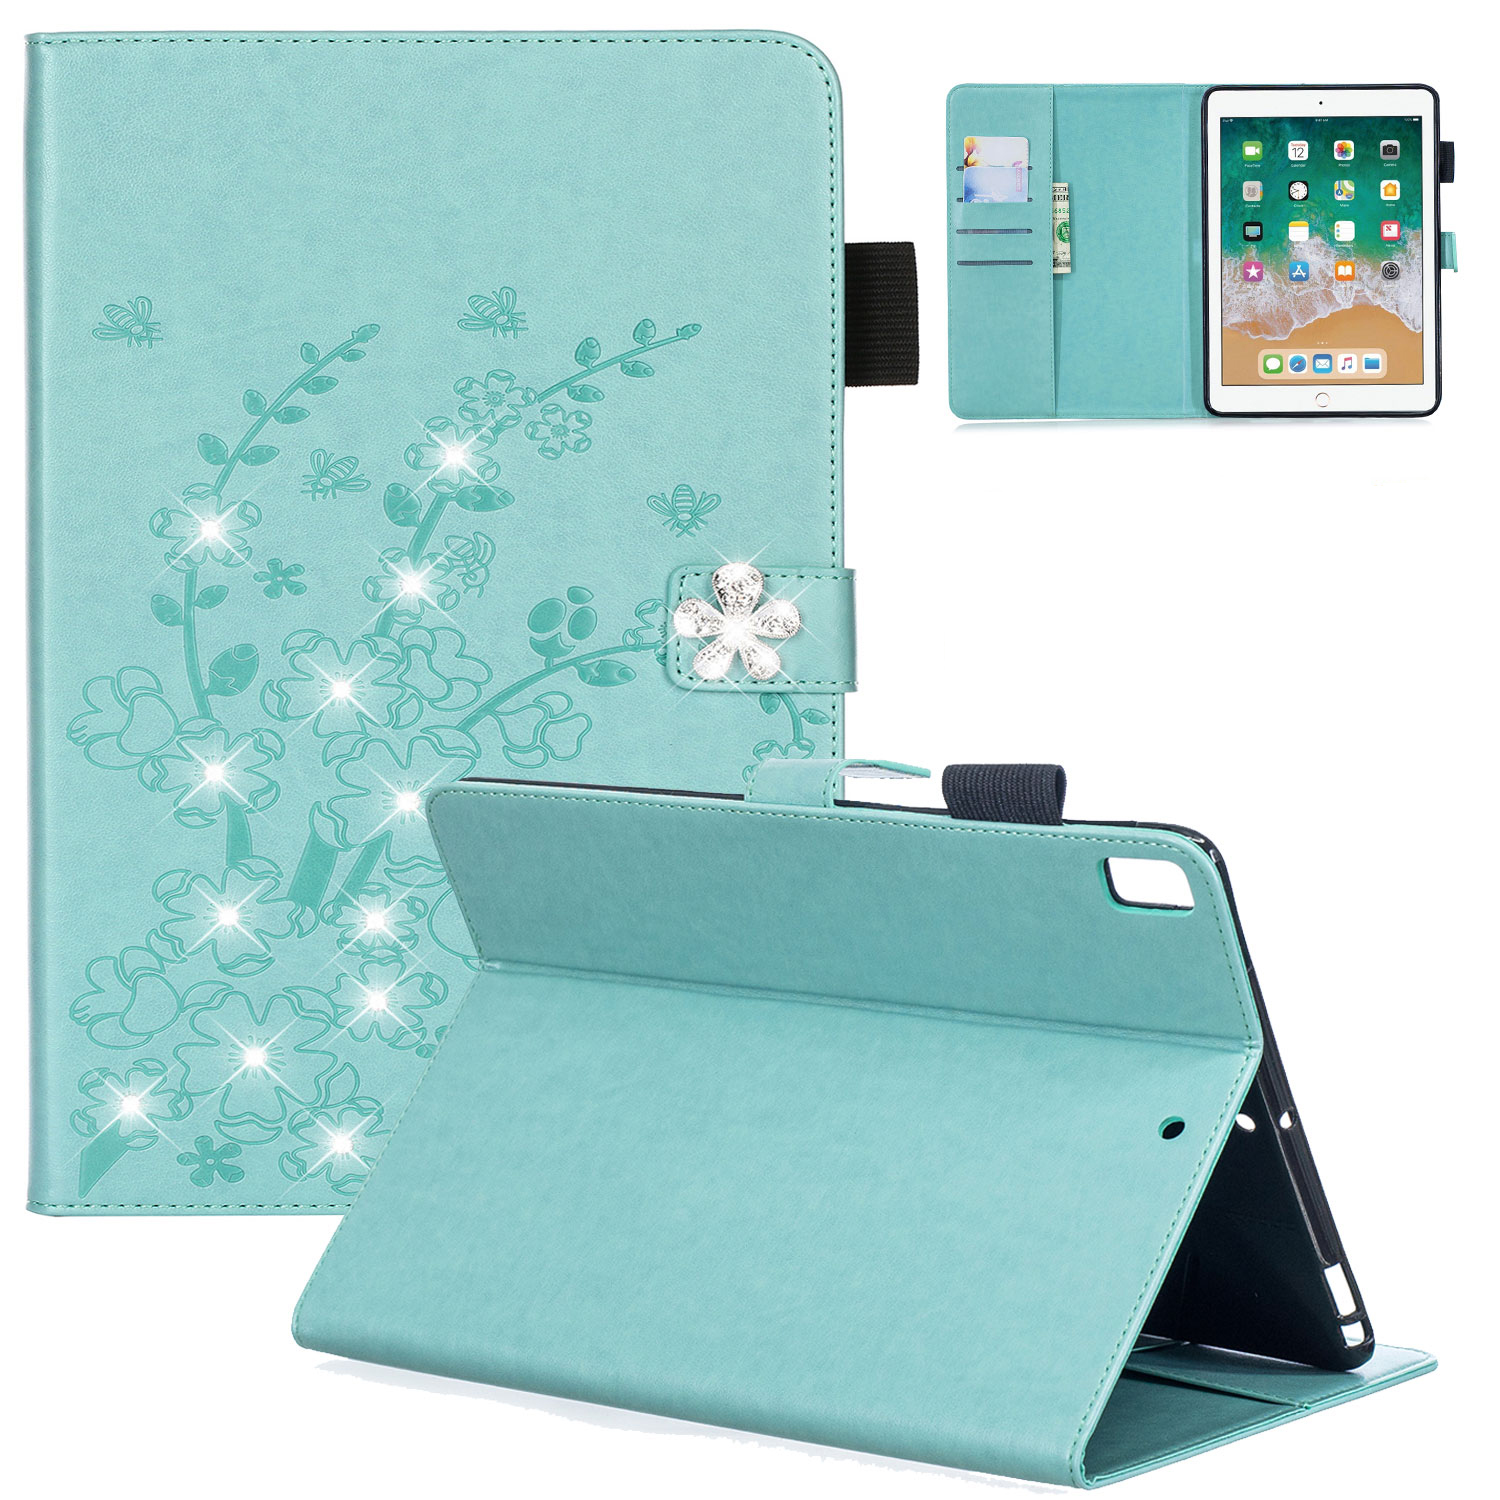 iPad 9.7" 2017/2018 Case, iPad Pro 9.7" Cover, iPad Air 2 1 Case, Allytech 3D Plum Blossom Series PU Leather Multi-Card Slots Wallet Case with Kickstand Function for Apple 9.7-inch Tablet, Green - image 1 of 1